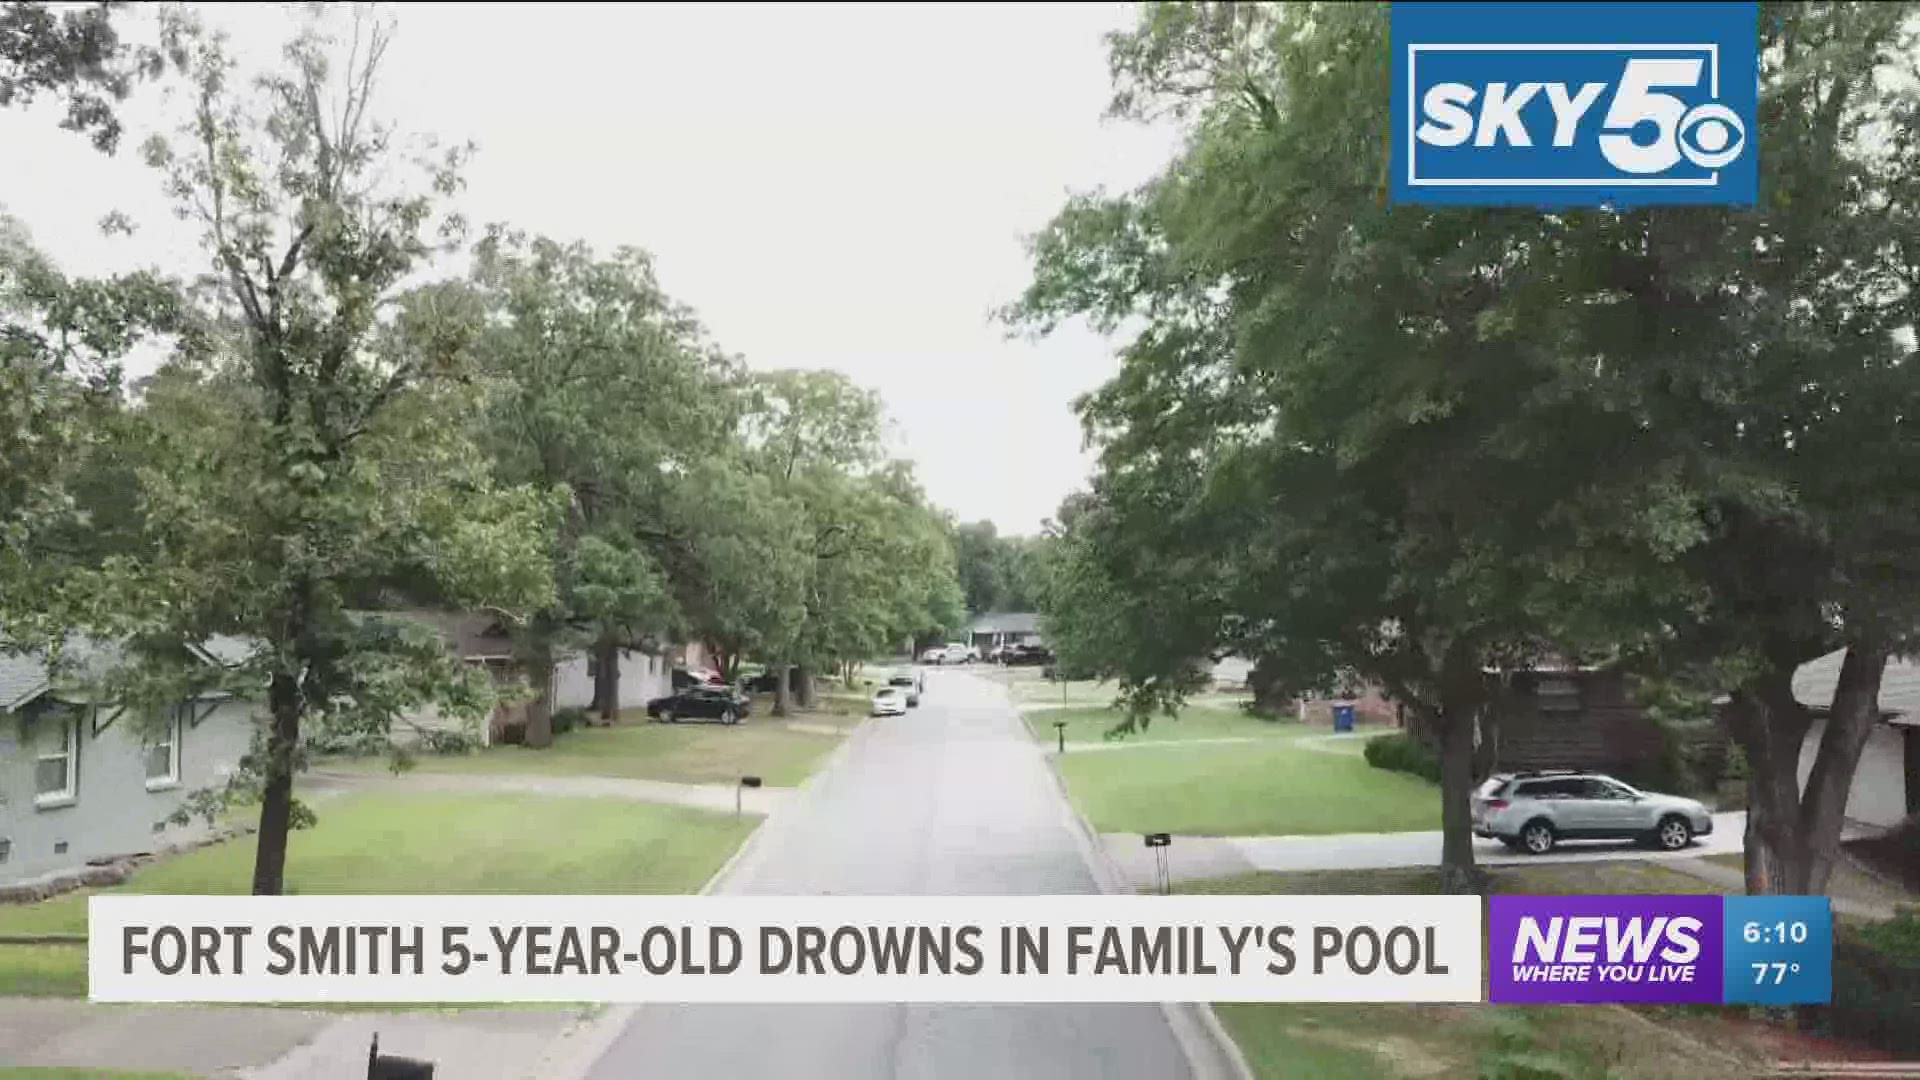 Fort Smith 5-year-old drowns in family's pool